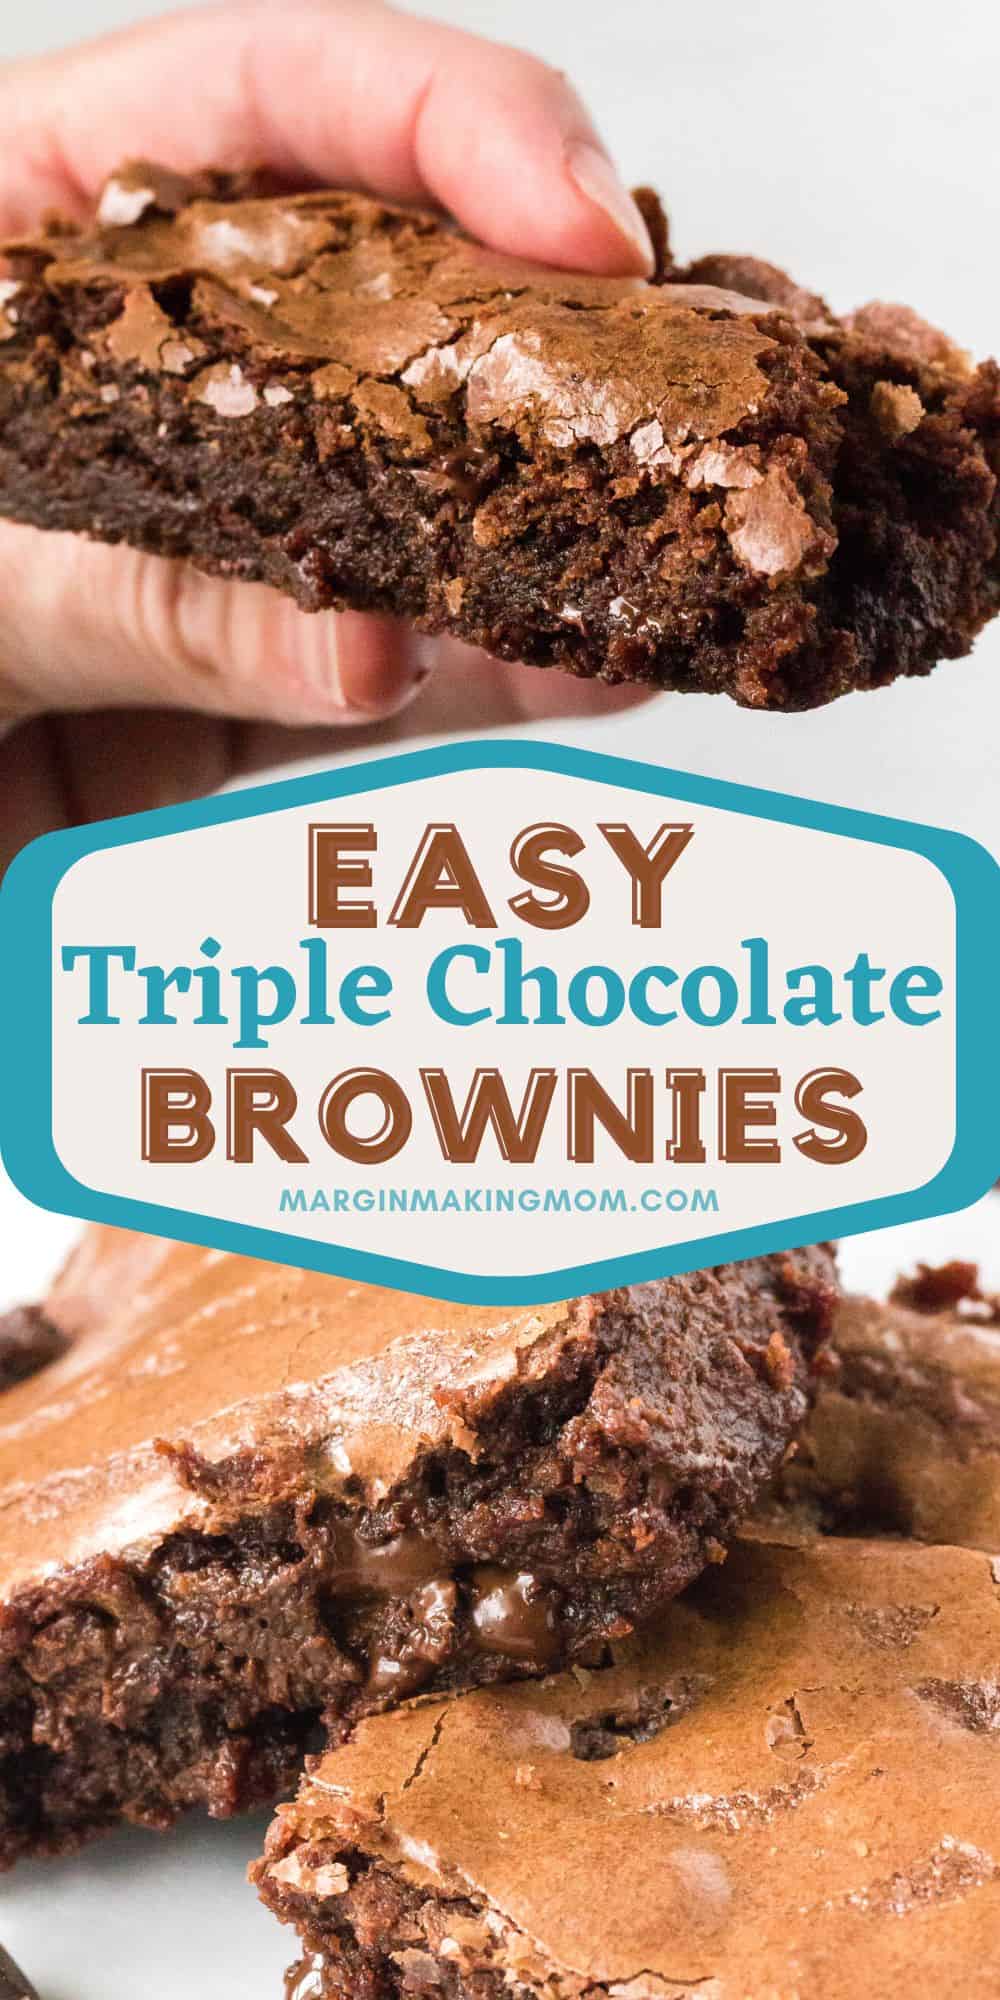 two photos; one shows a woman's hand holding a brownie, the other shows triple chocolate brownies stacked together.